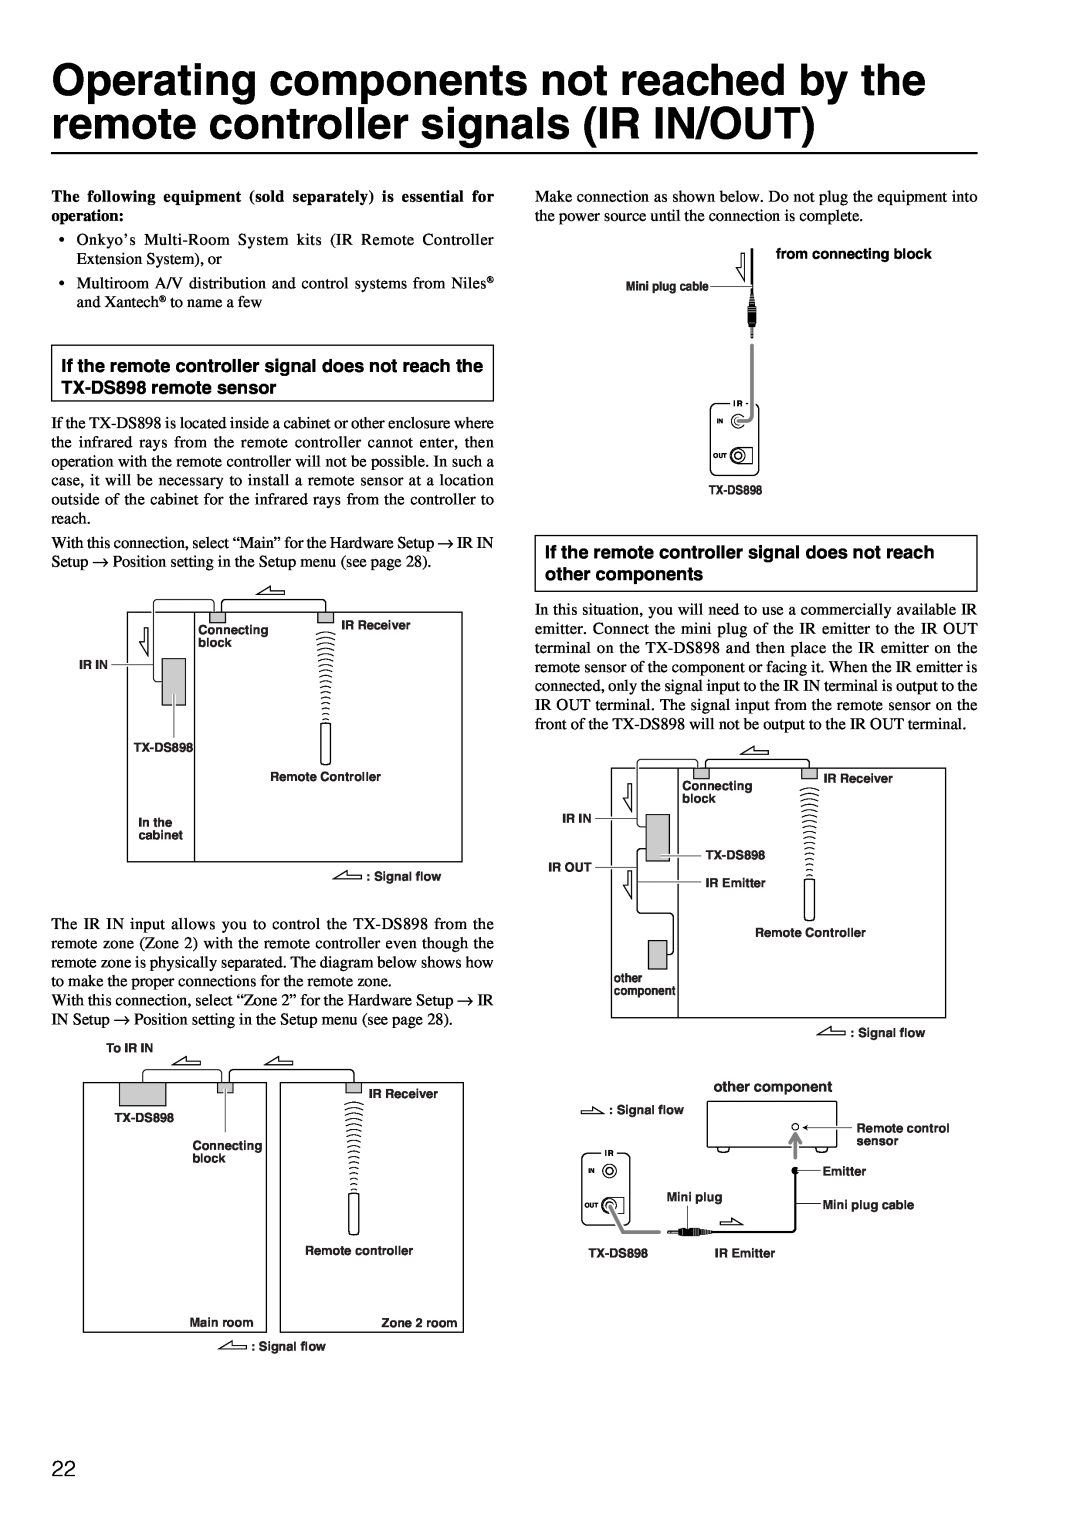 Onkyo TX-DS898 instruction manual from connecting block, other component 